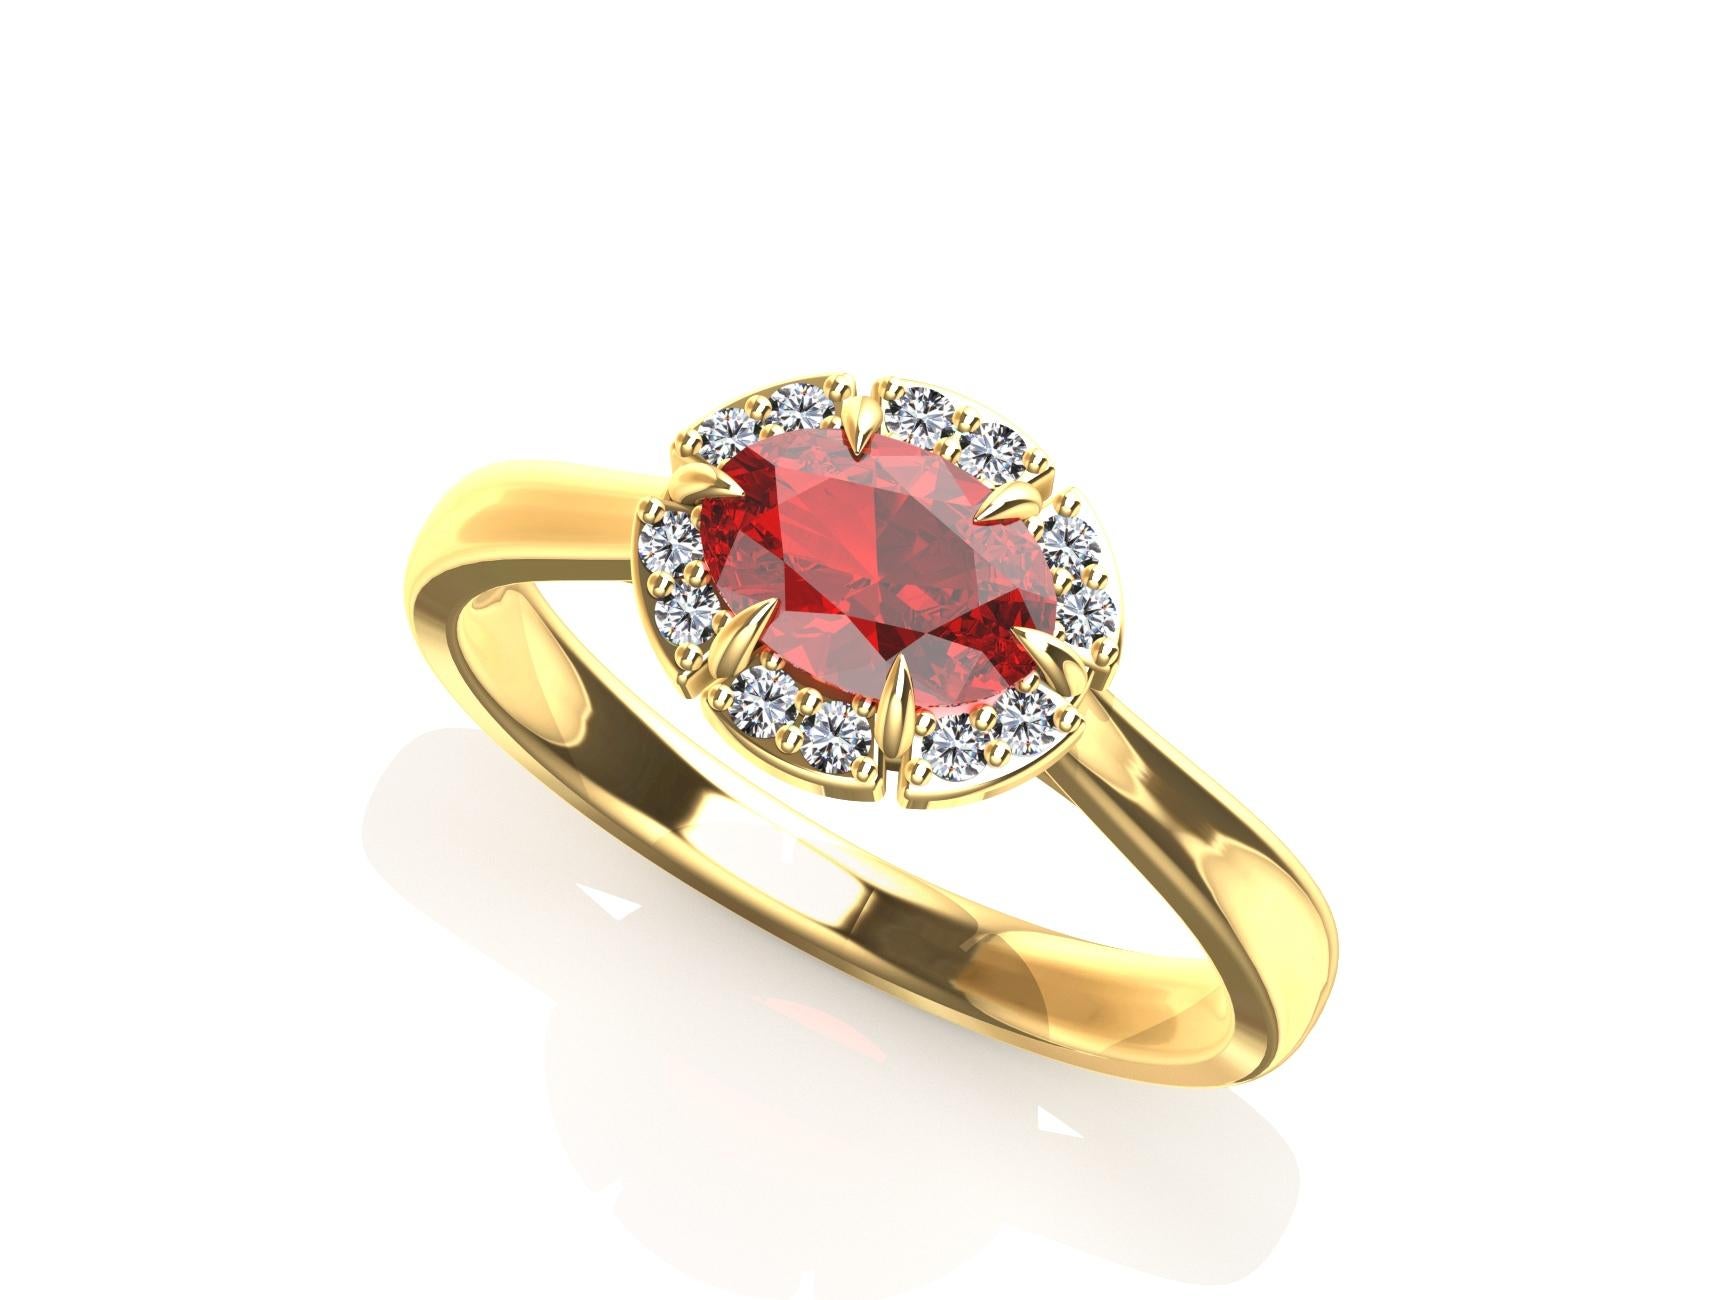 For Sale:  18 Karat Yellow Gold Art Deco Inspired Ruby Engagement Ring 3